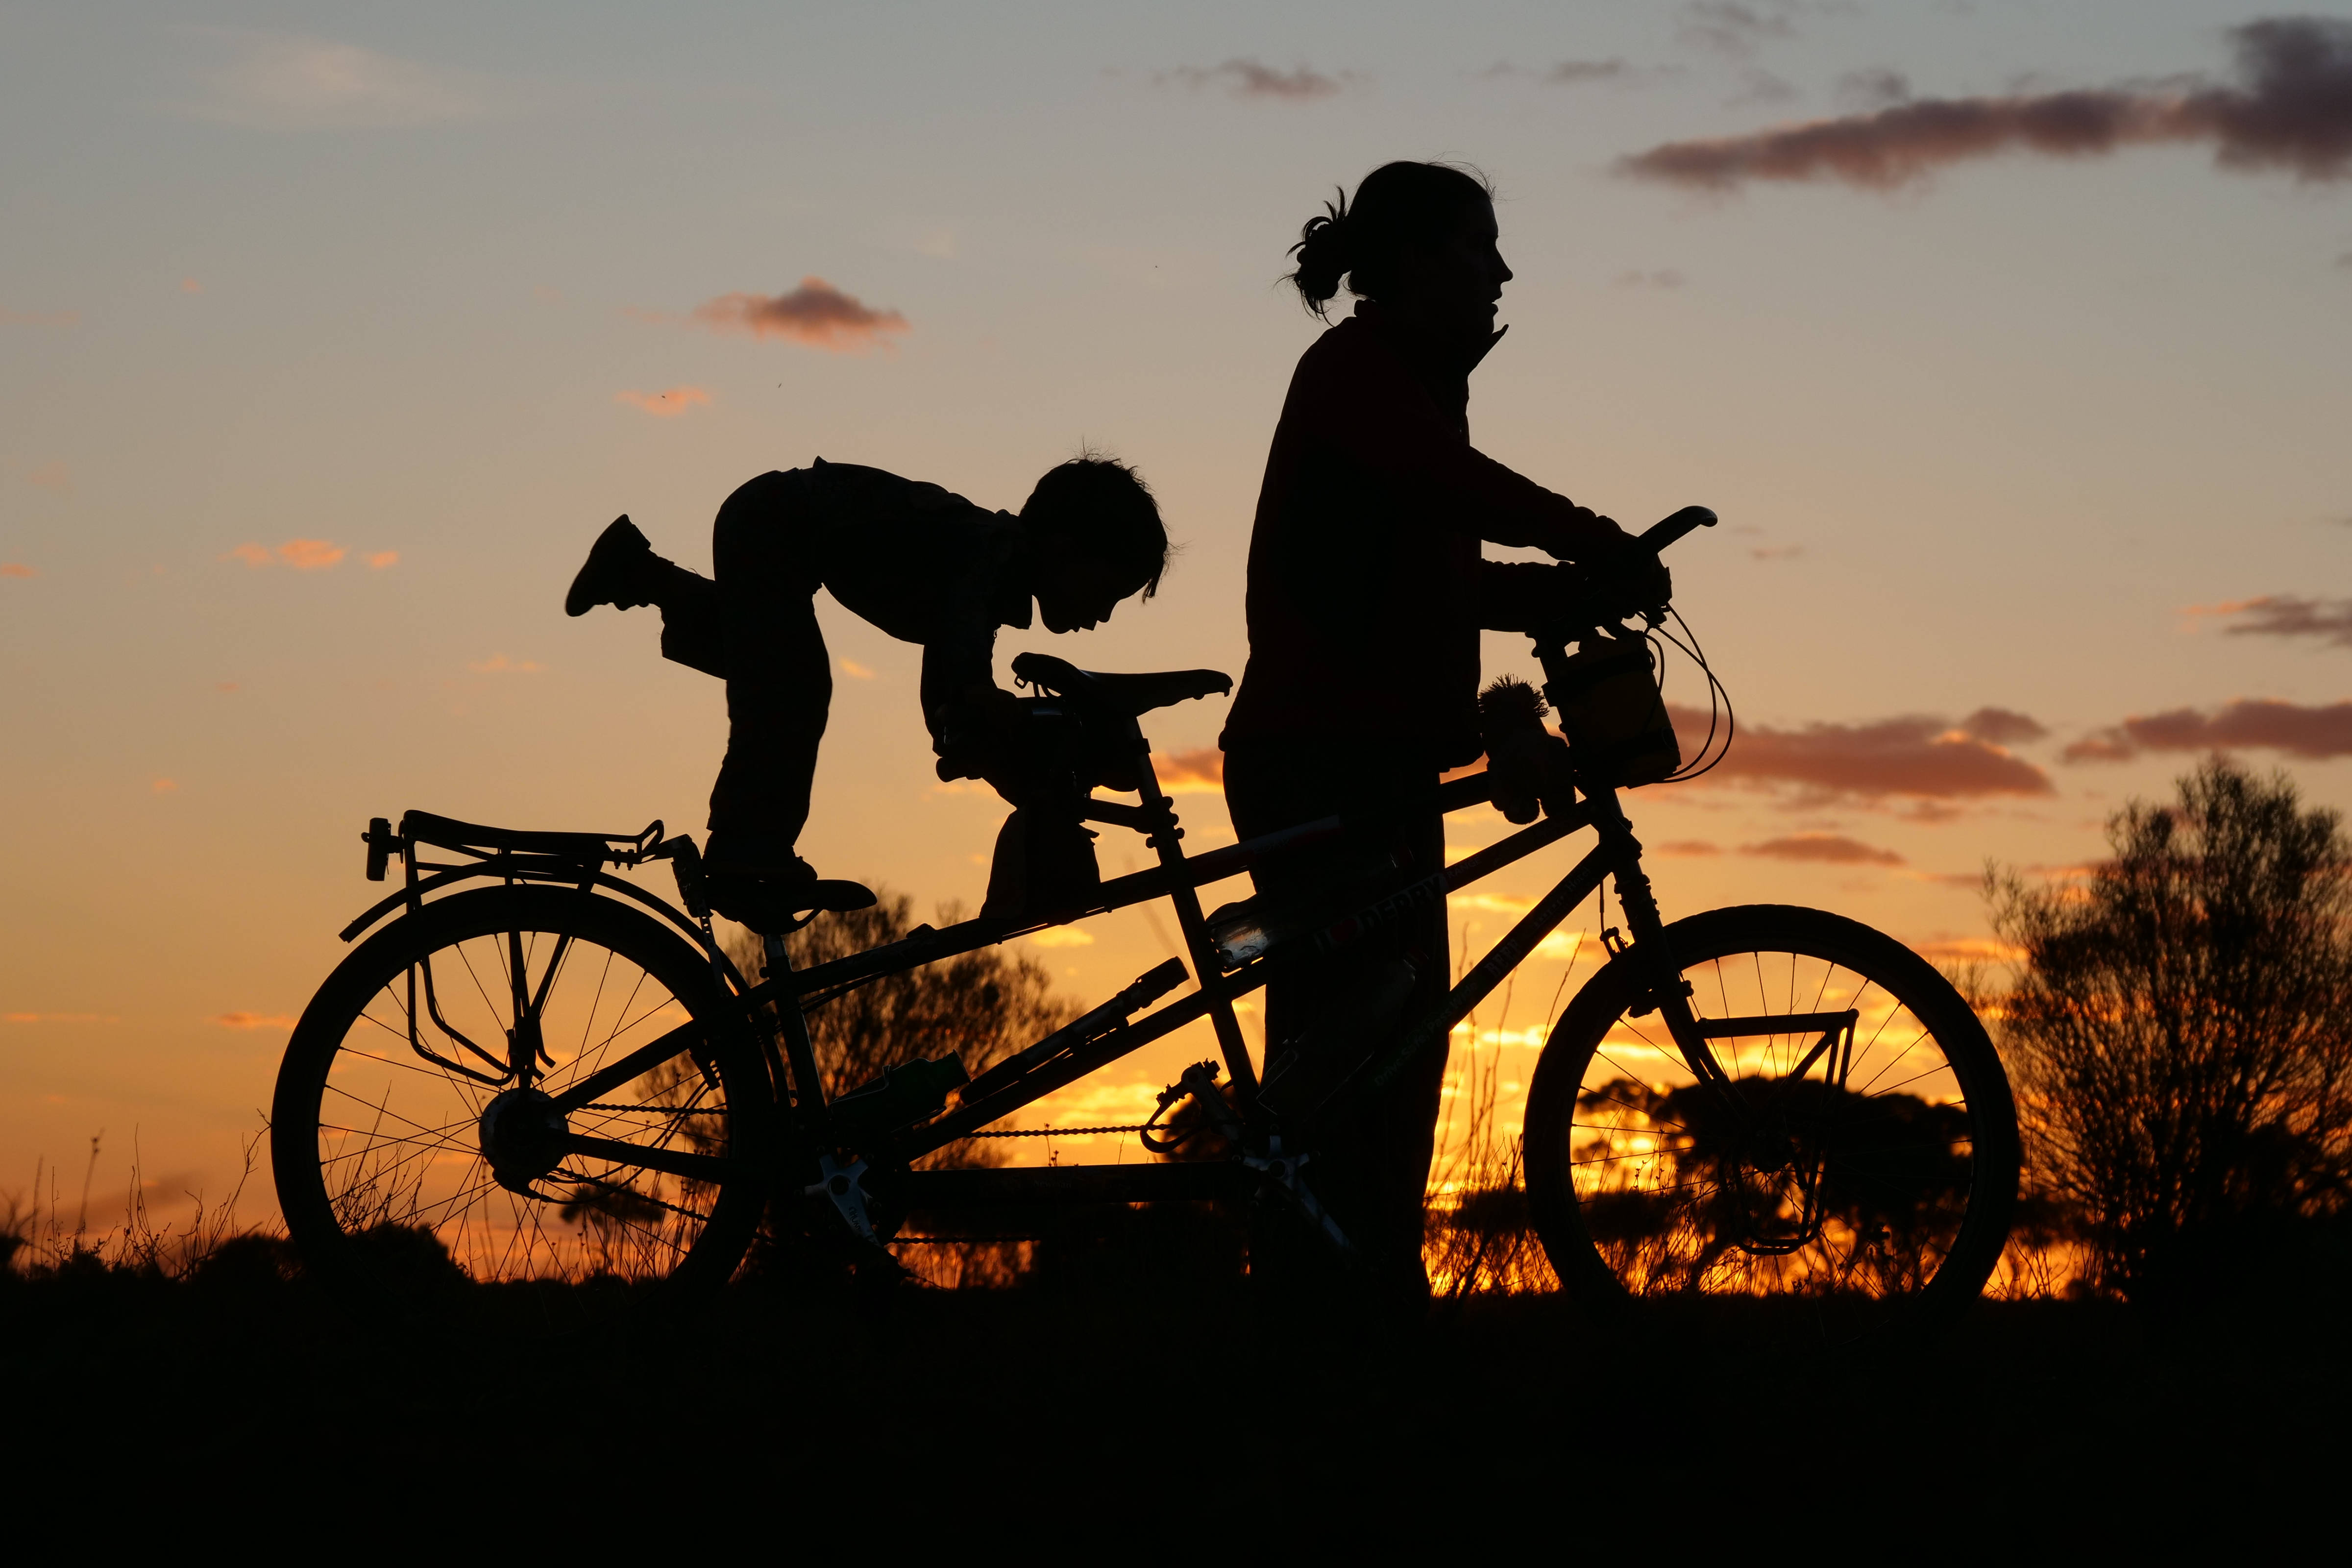 Silhouette of Wilfy and Nicola on tandem bike with sunset.